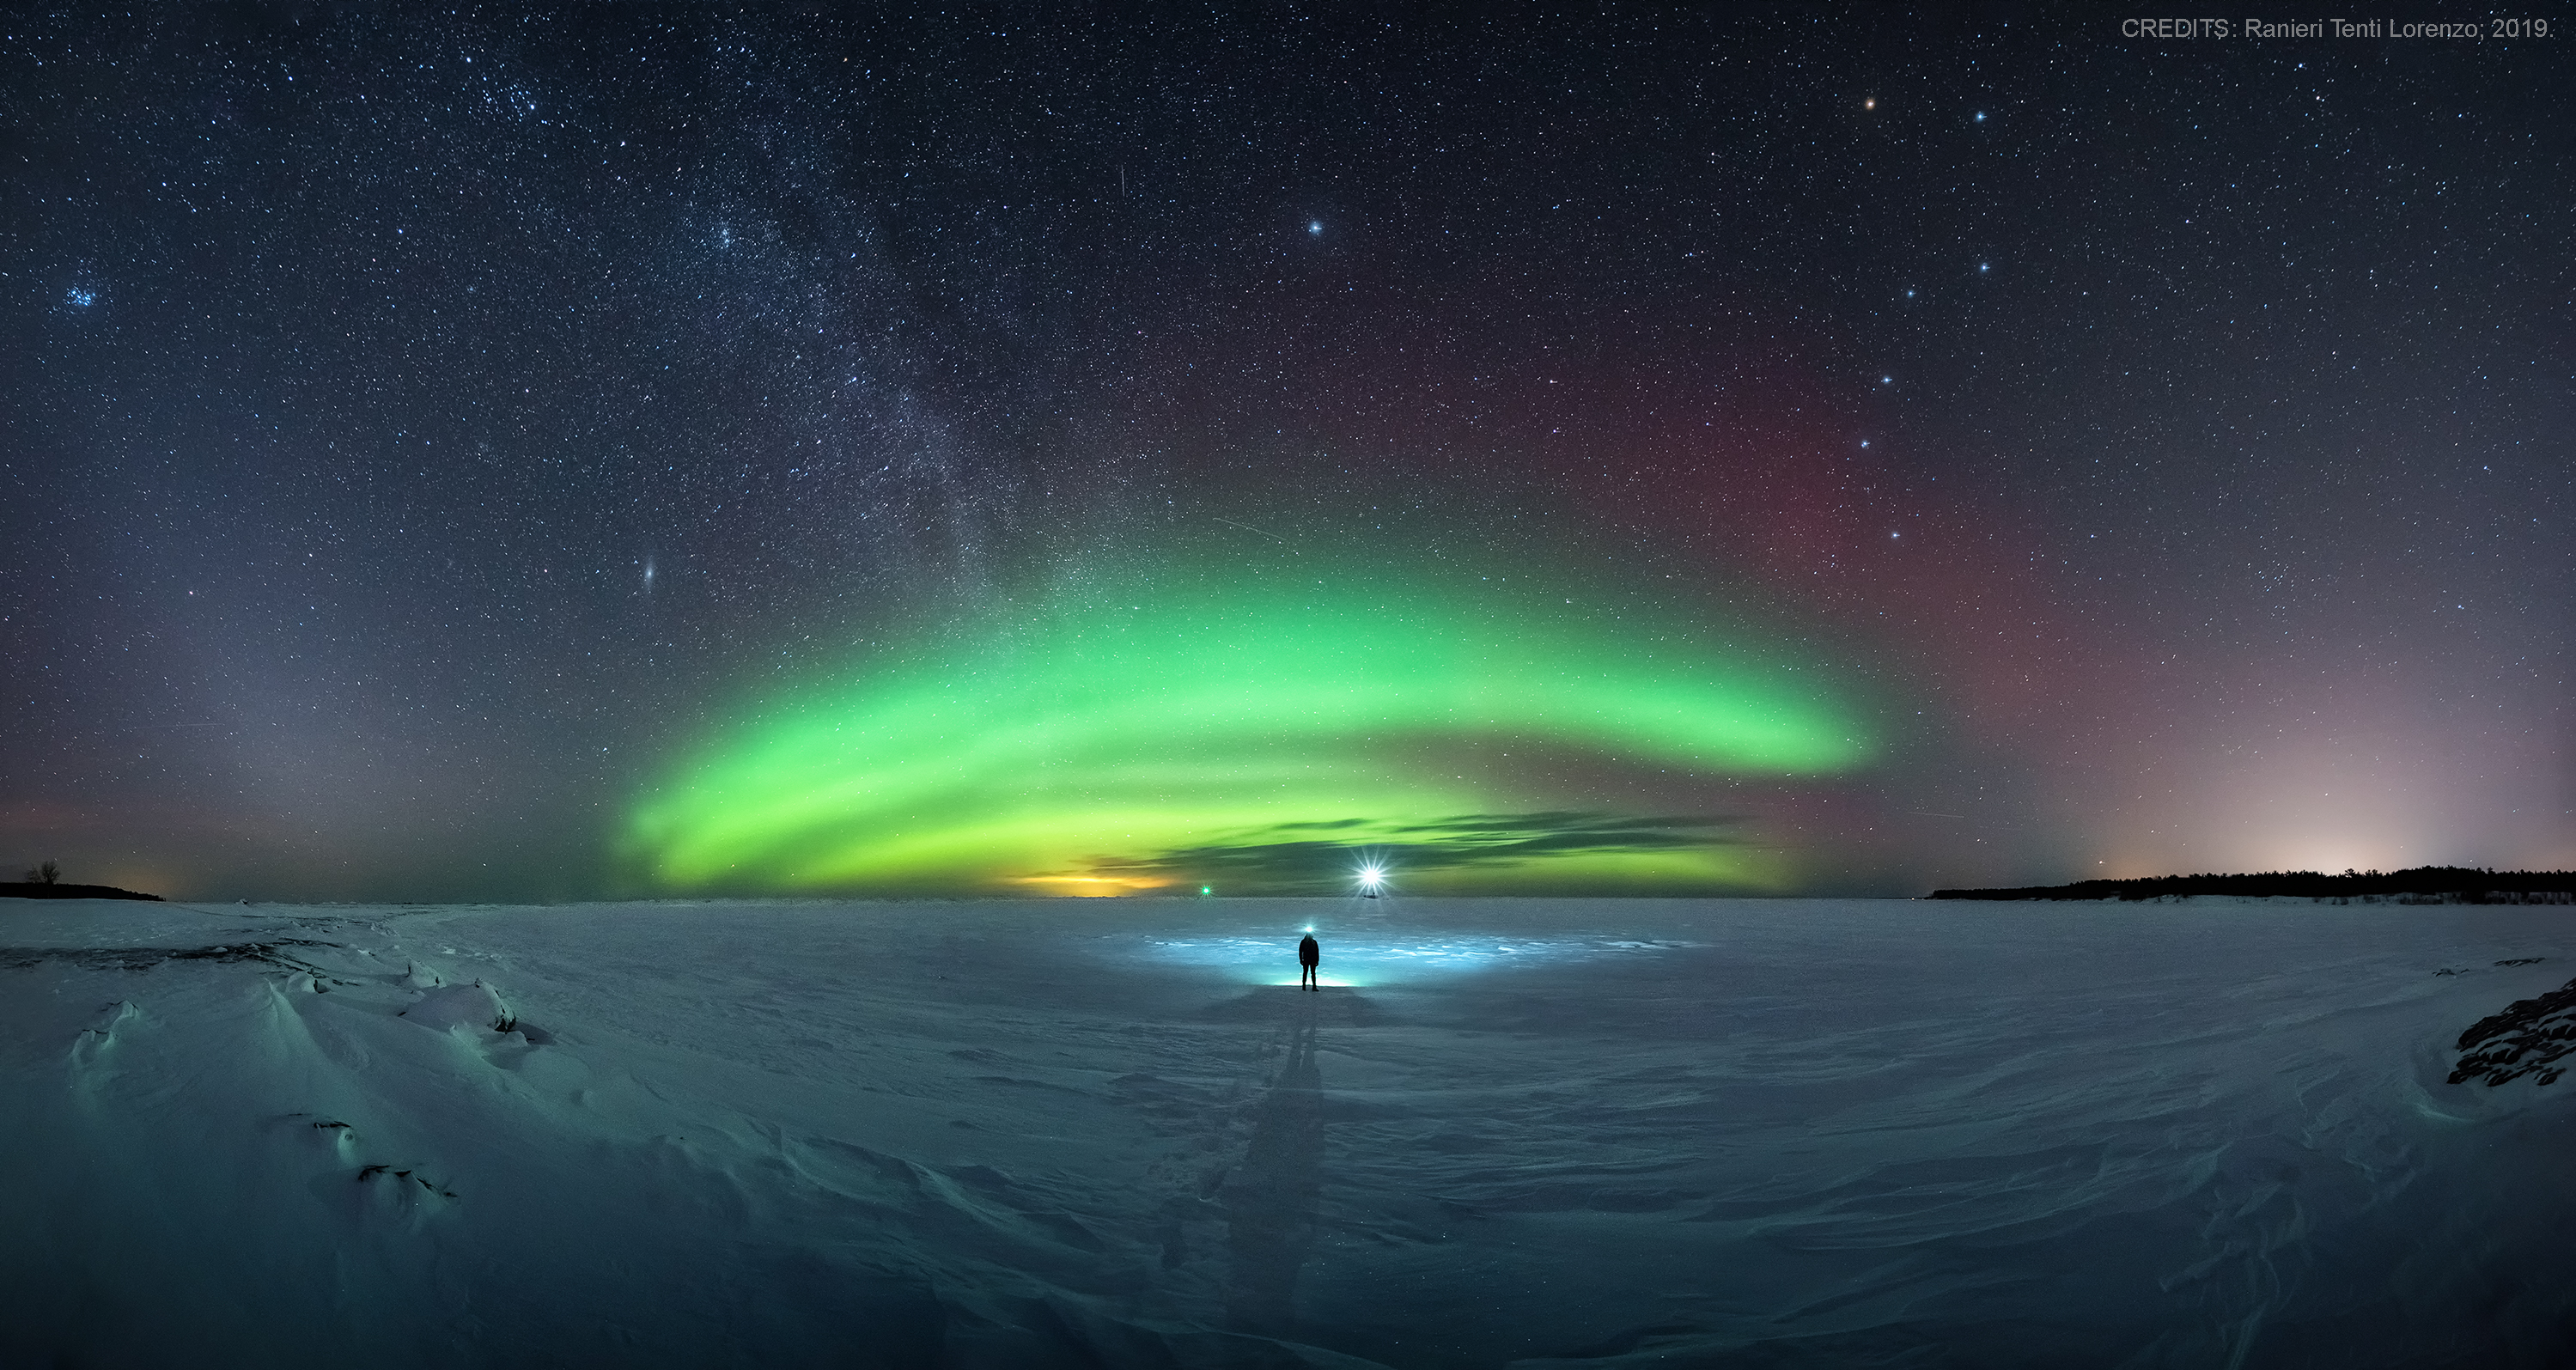 Apod Dayframe Apod 2019 March 22 A Symphony In Northern Winter Skies